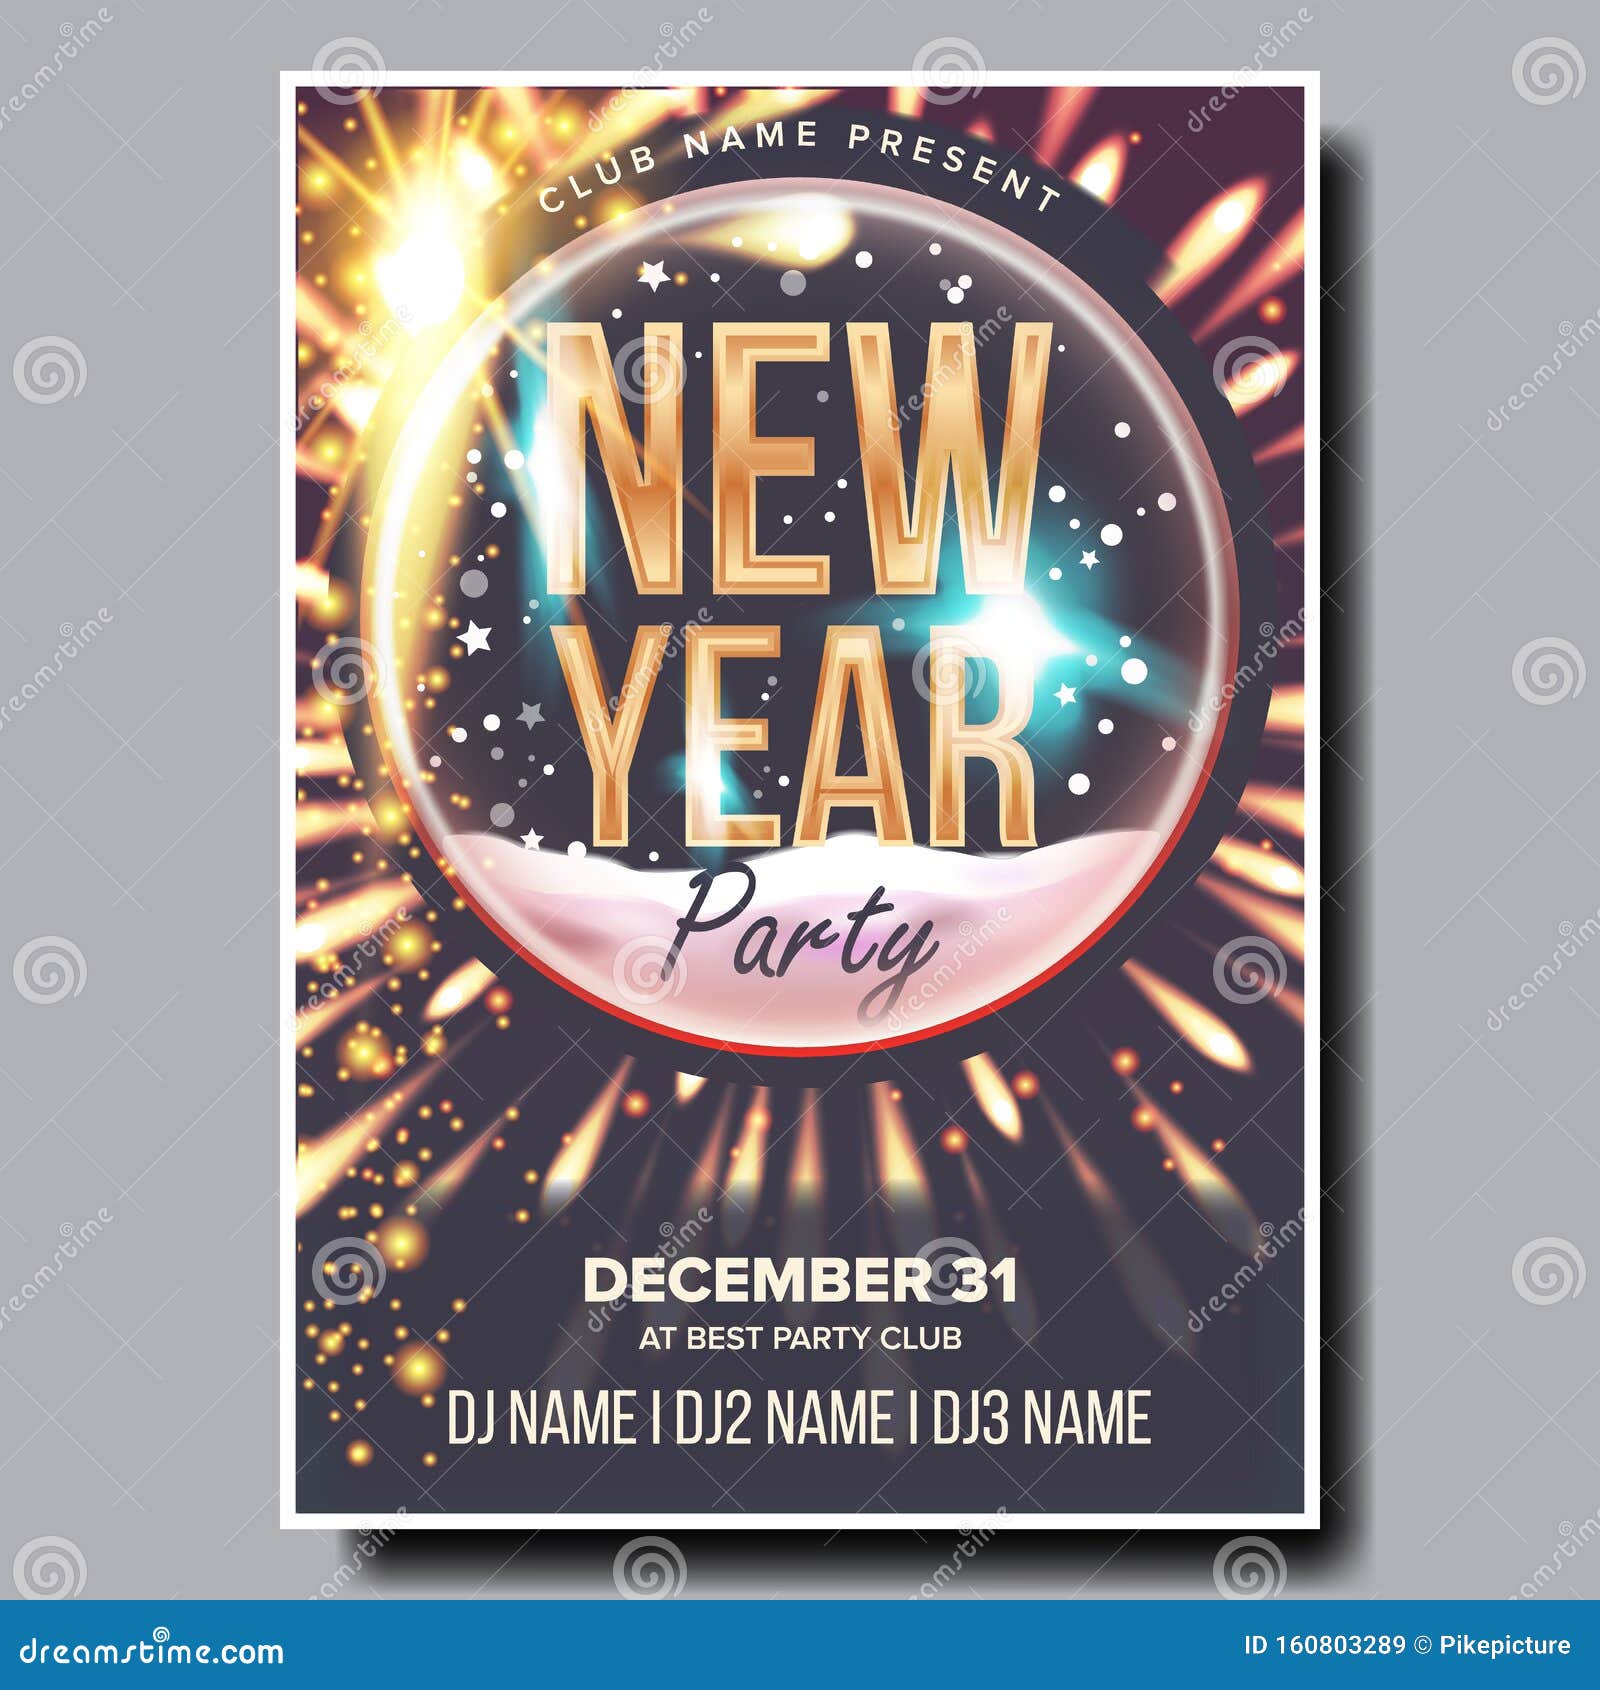 23 Christmas Party Flyer Poster Vector. Happy New Year. Holiday With Regard To Free Holiday Party Flyer Templates